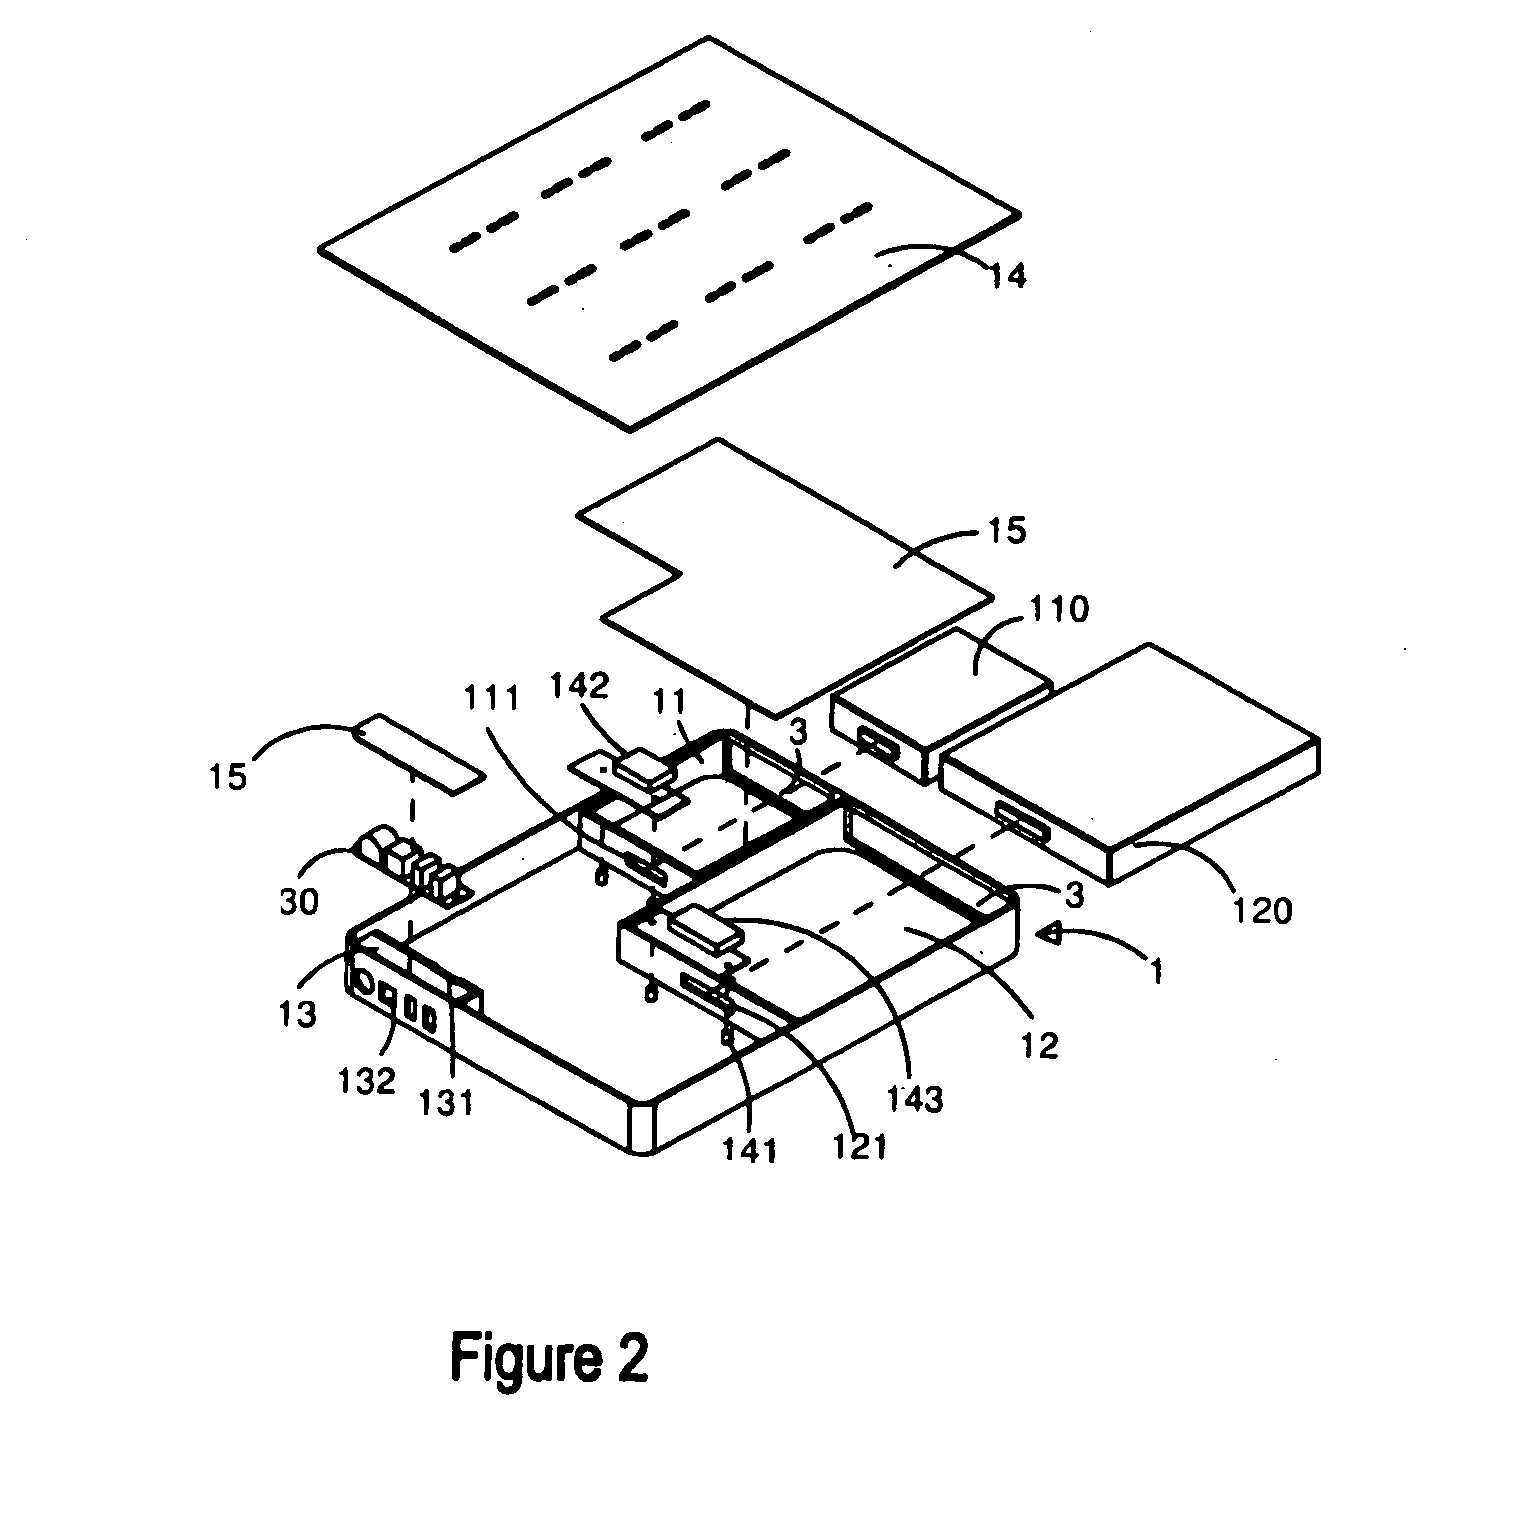 Waterproof casing with multiple isolated compartments